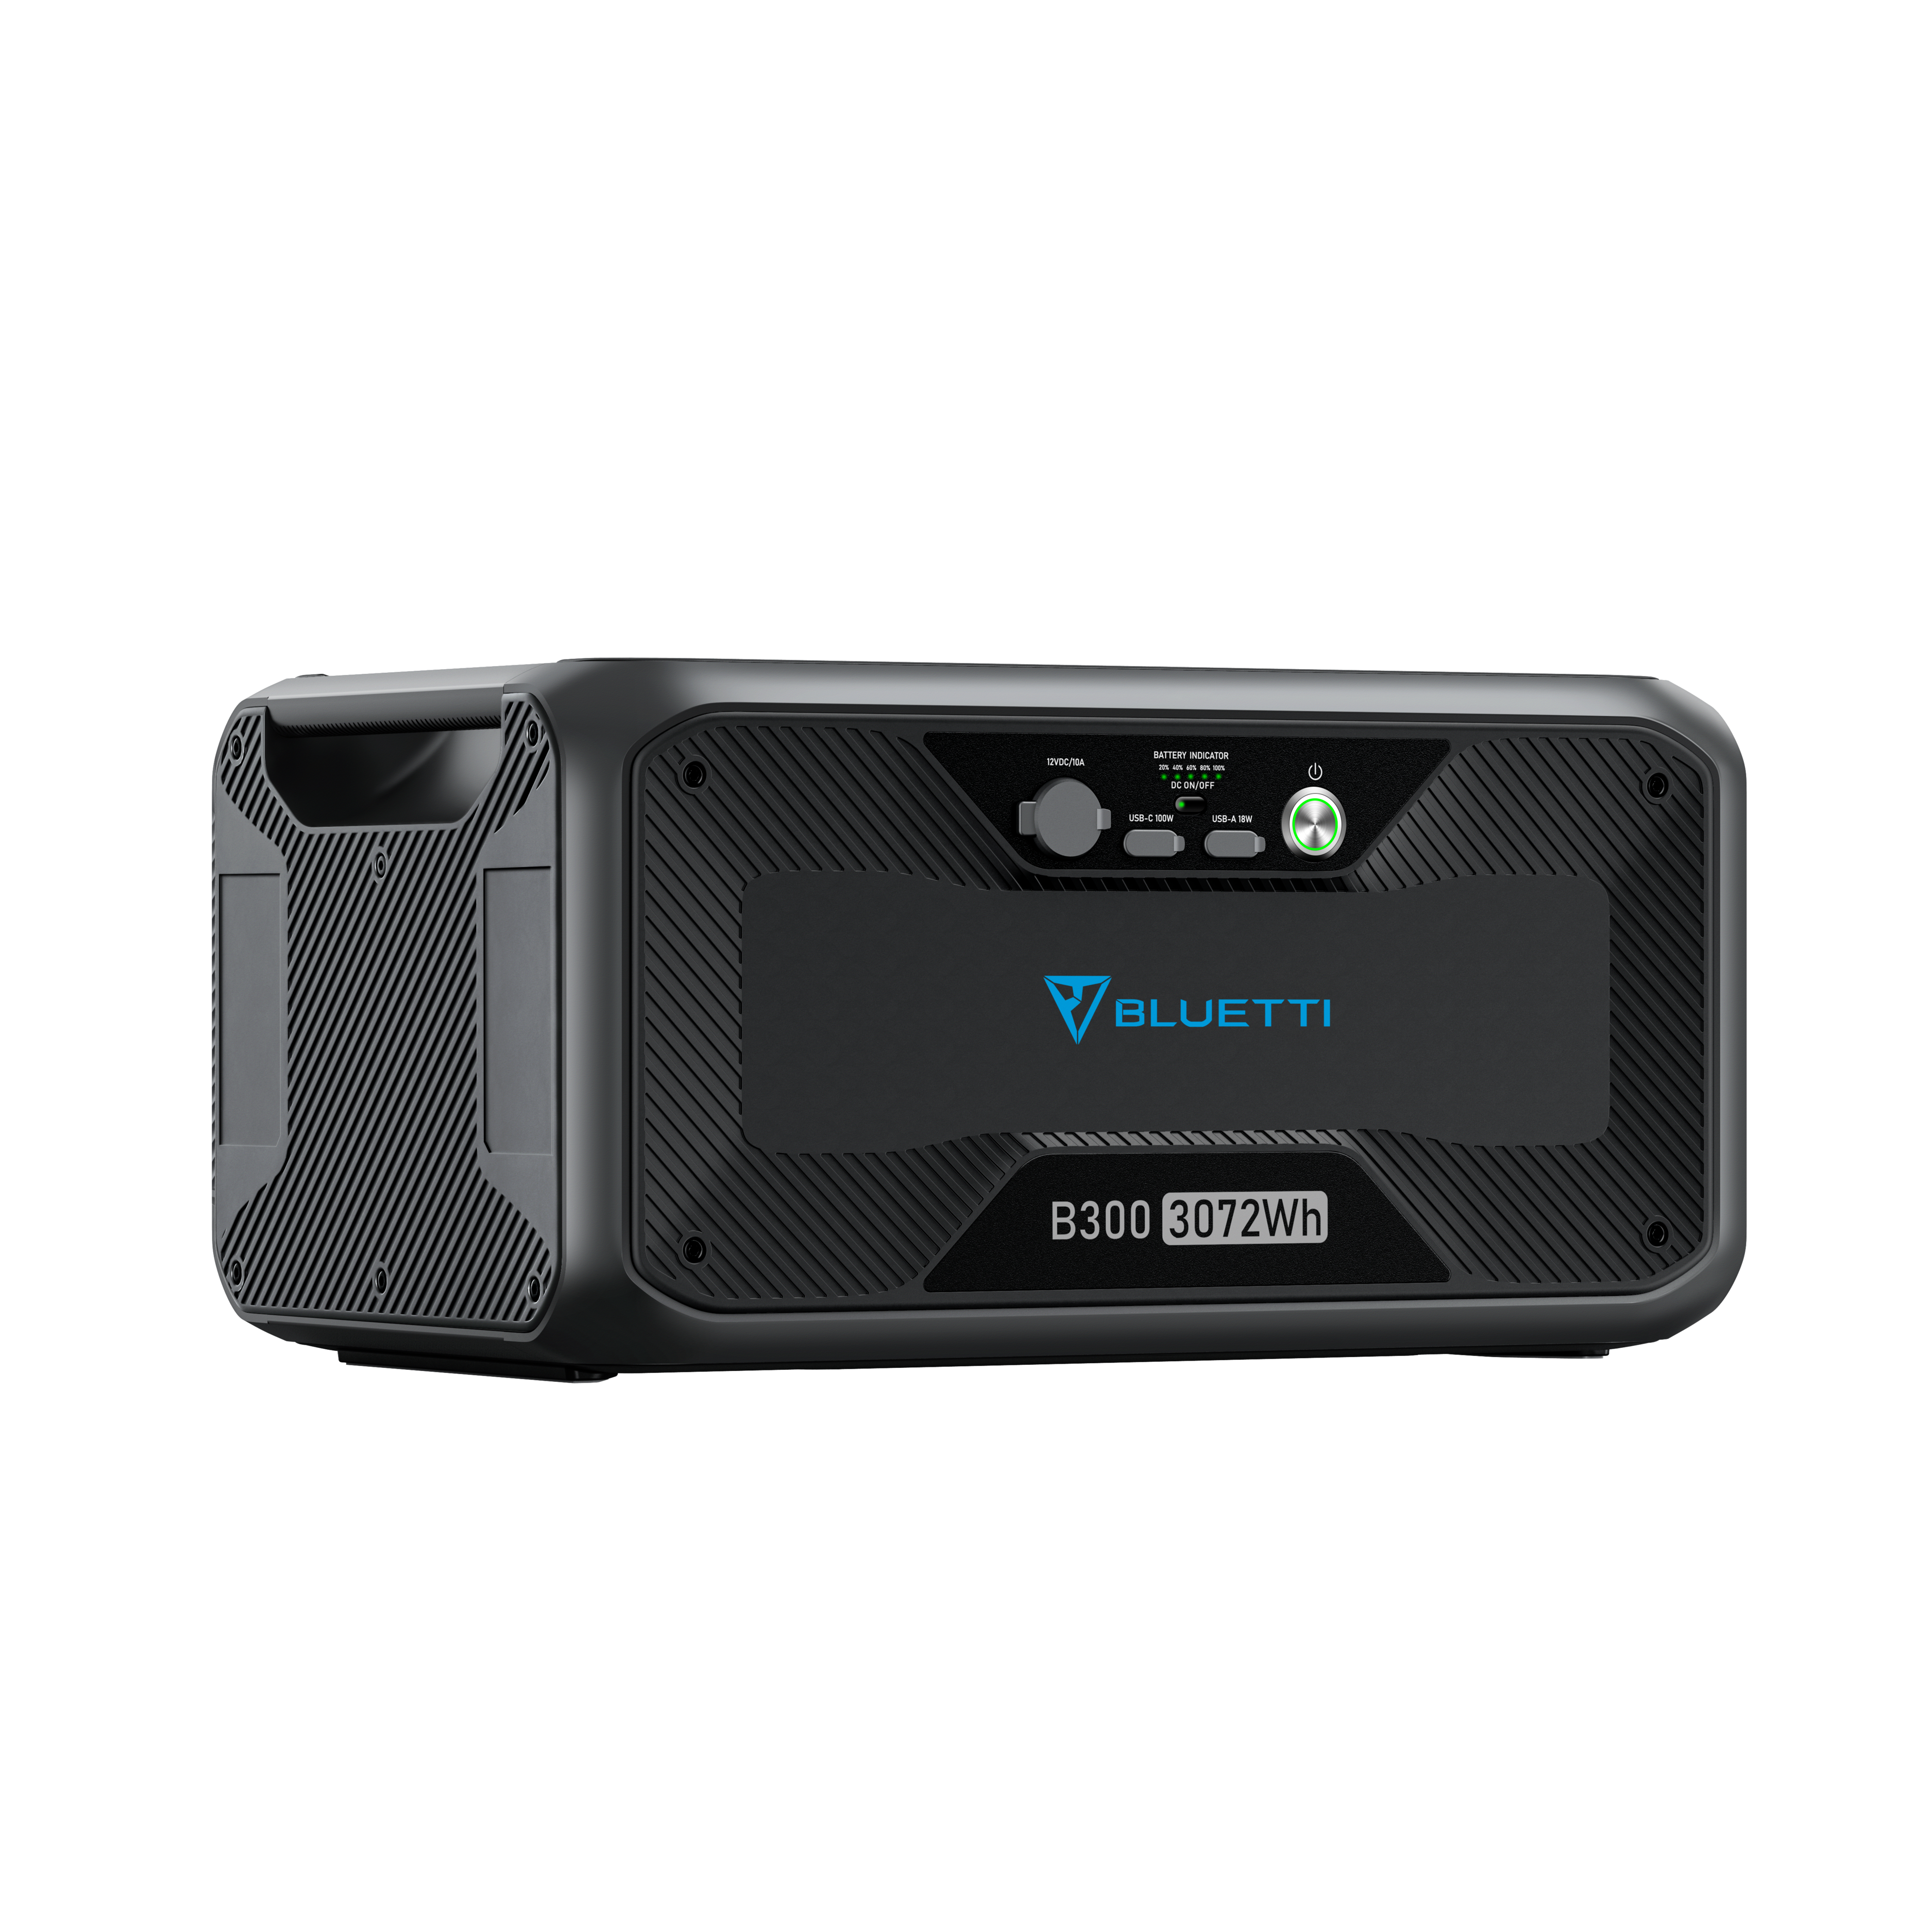 Bluetti B300 3072Wh - Powerful Expansion Battery